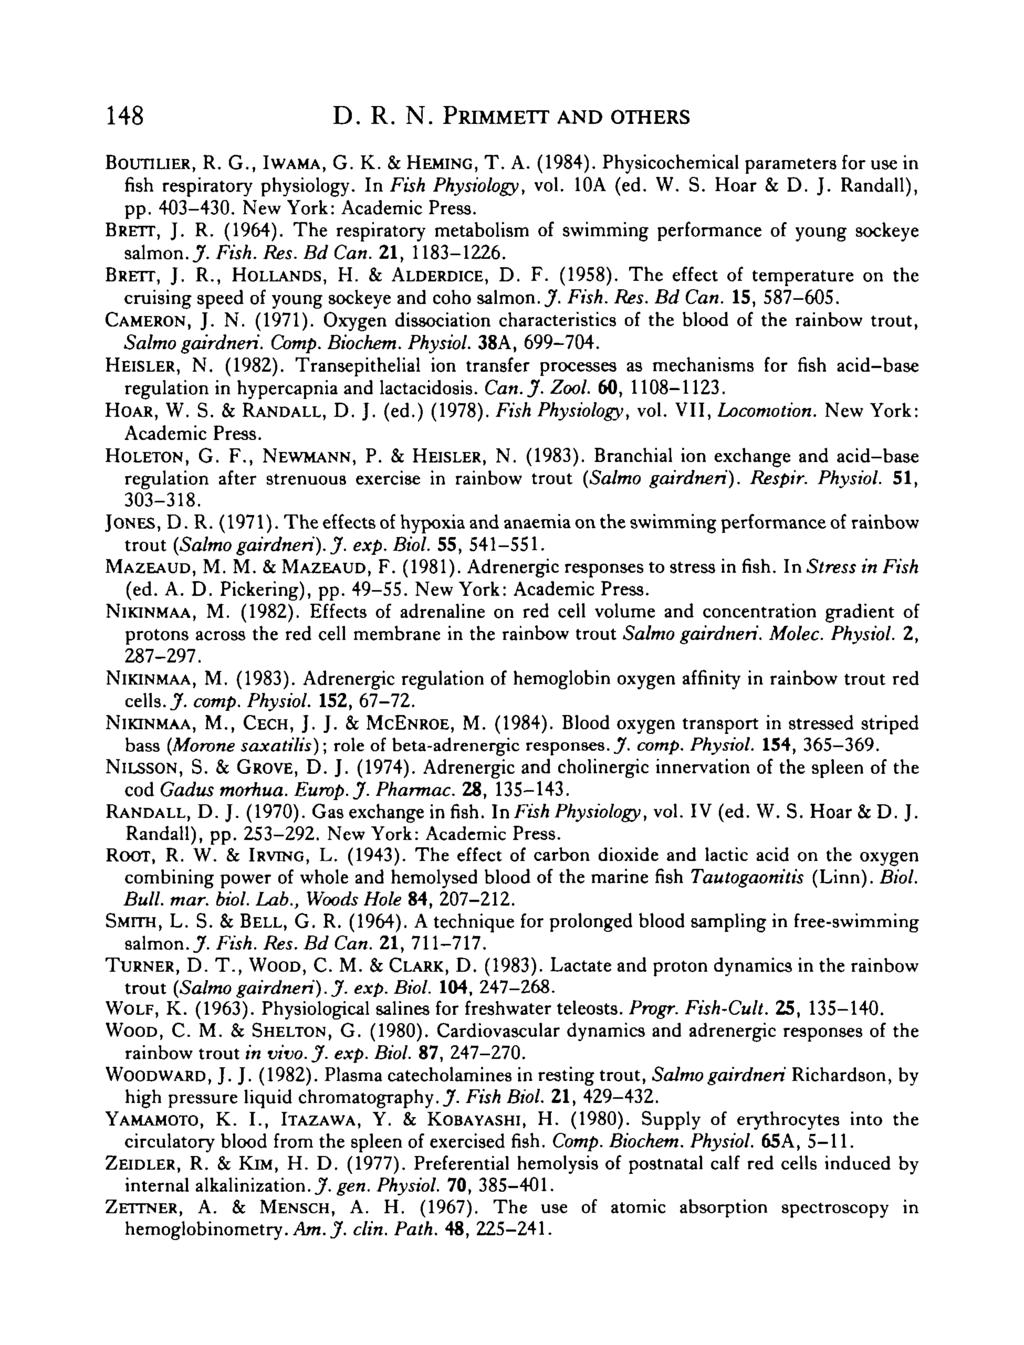 148 D. R. N. PRIMMETT AND OTHERS BOUTILIER, R. G., IWAMA, G. K. & HEMING, T. A. (1984). Physicochemical parameters for use in fish respiratory physiology. In Fish Physiology, vol. 10A (ed. W. S.